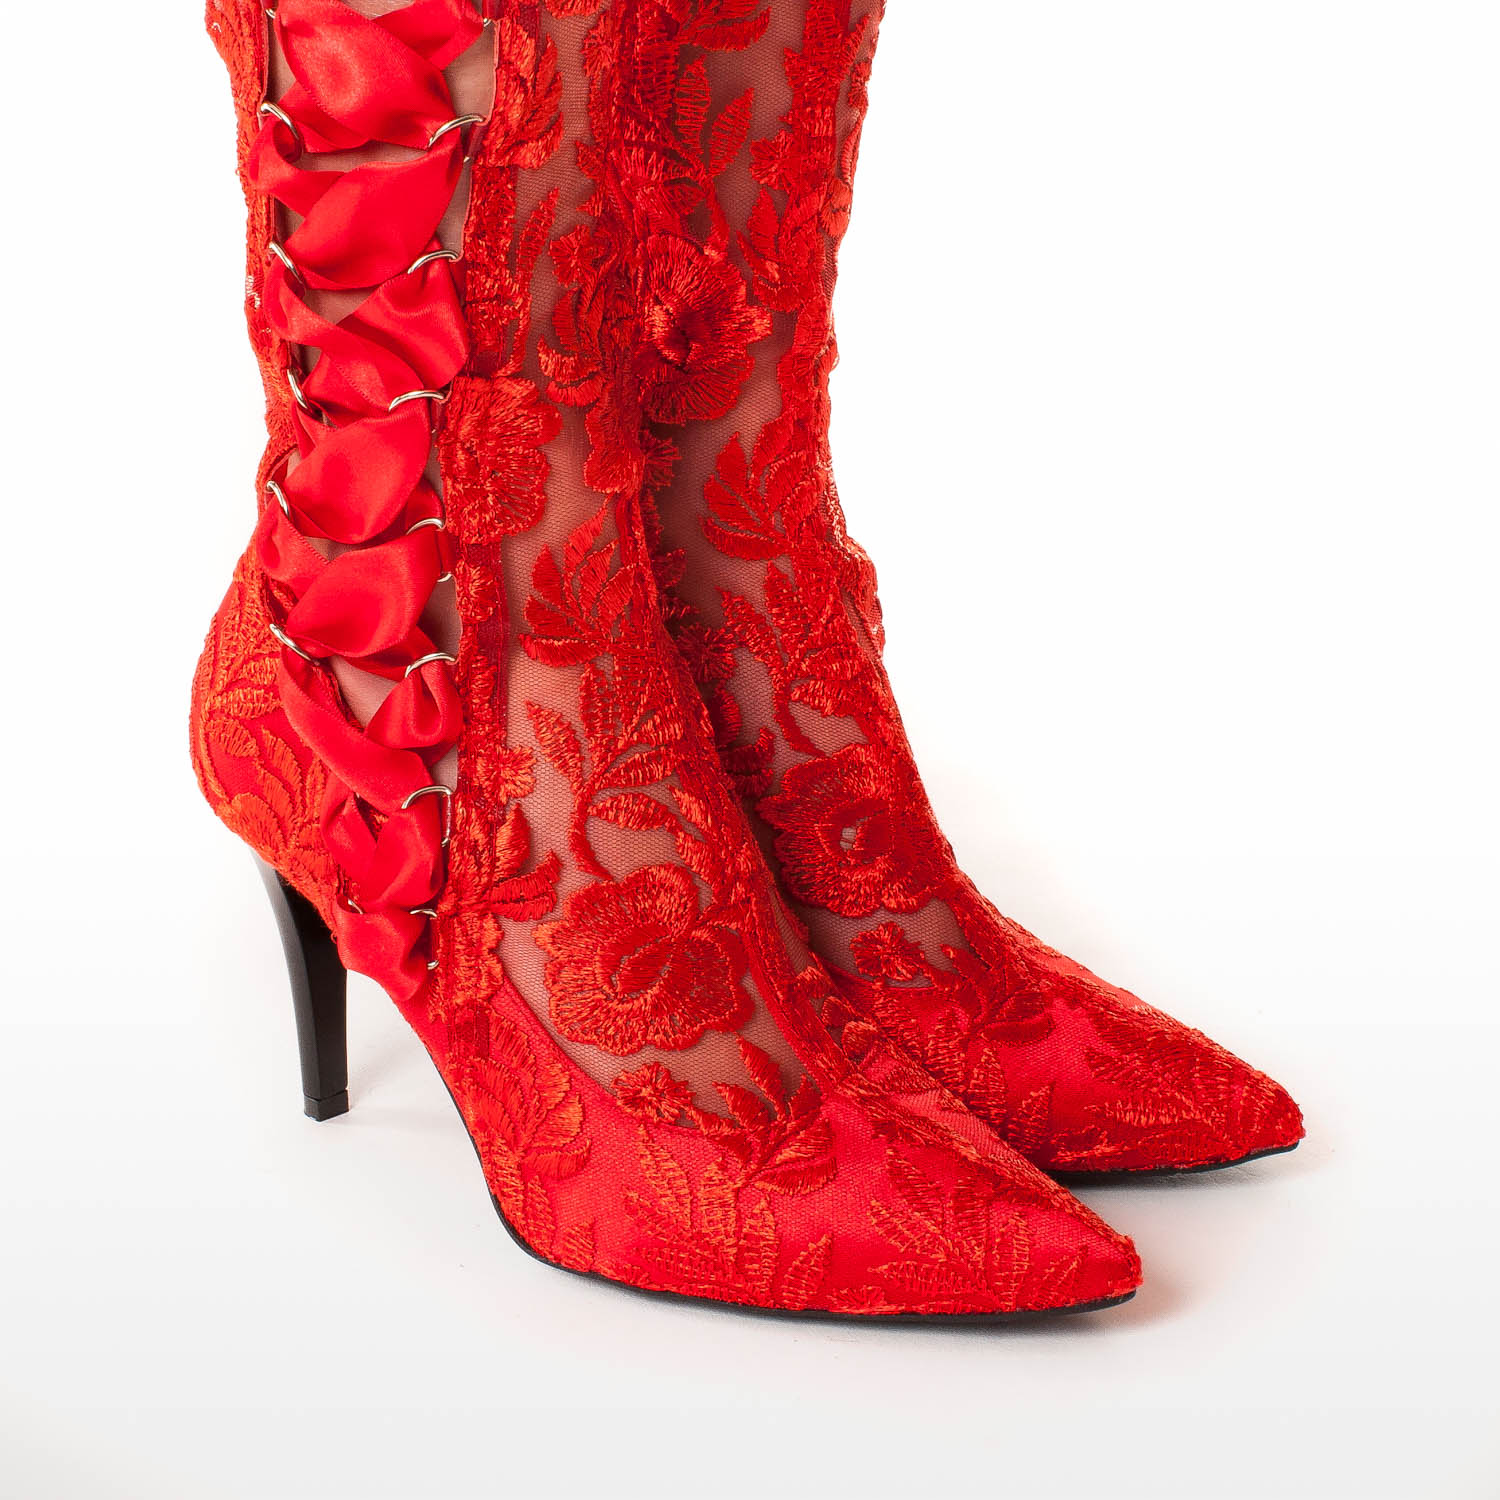 Red Lace Boots - House of Elliot over 